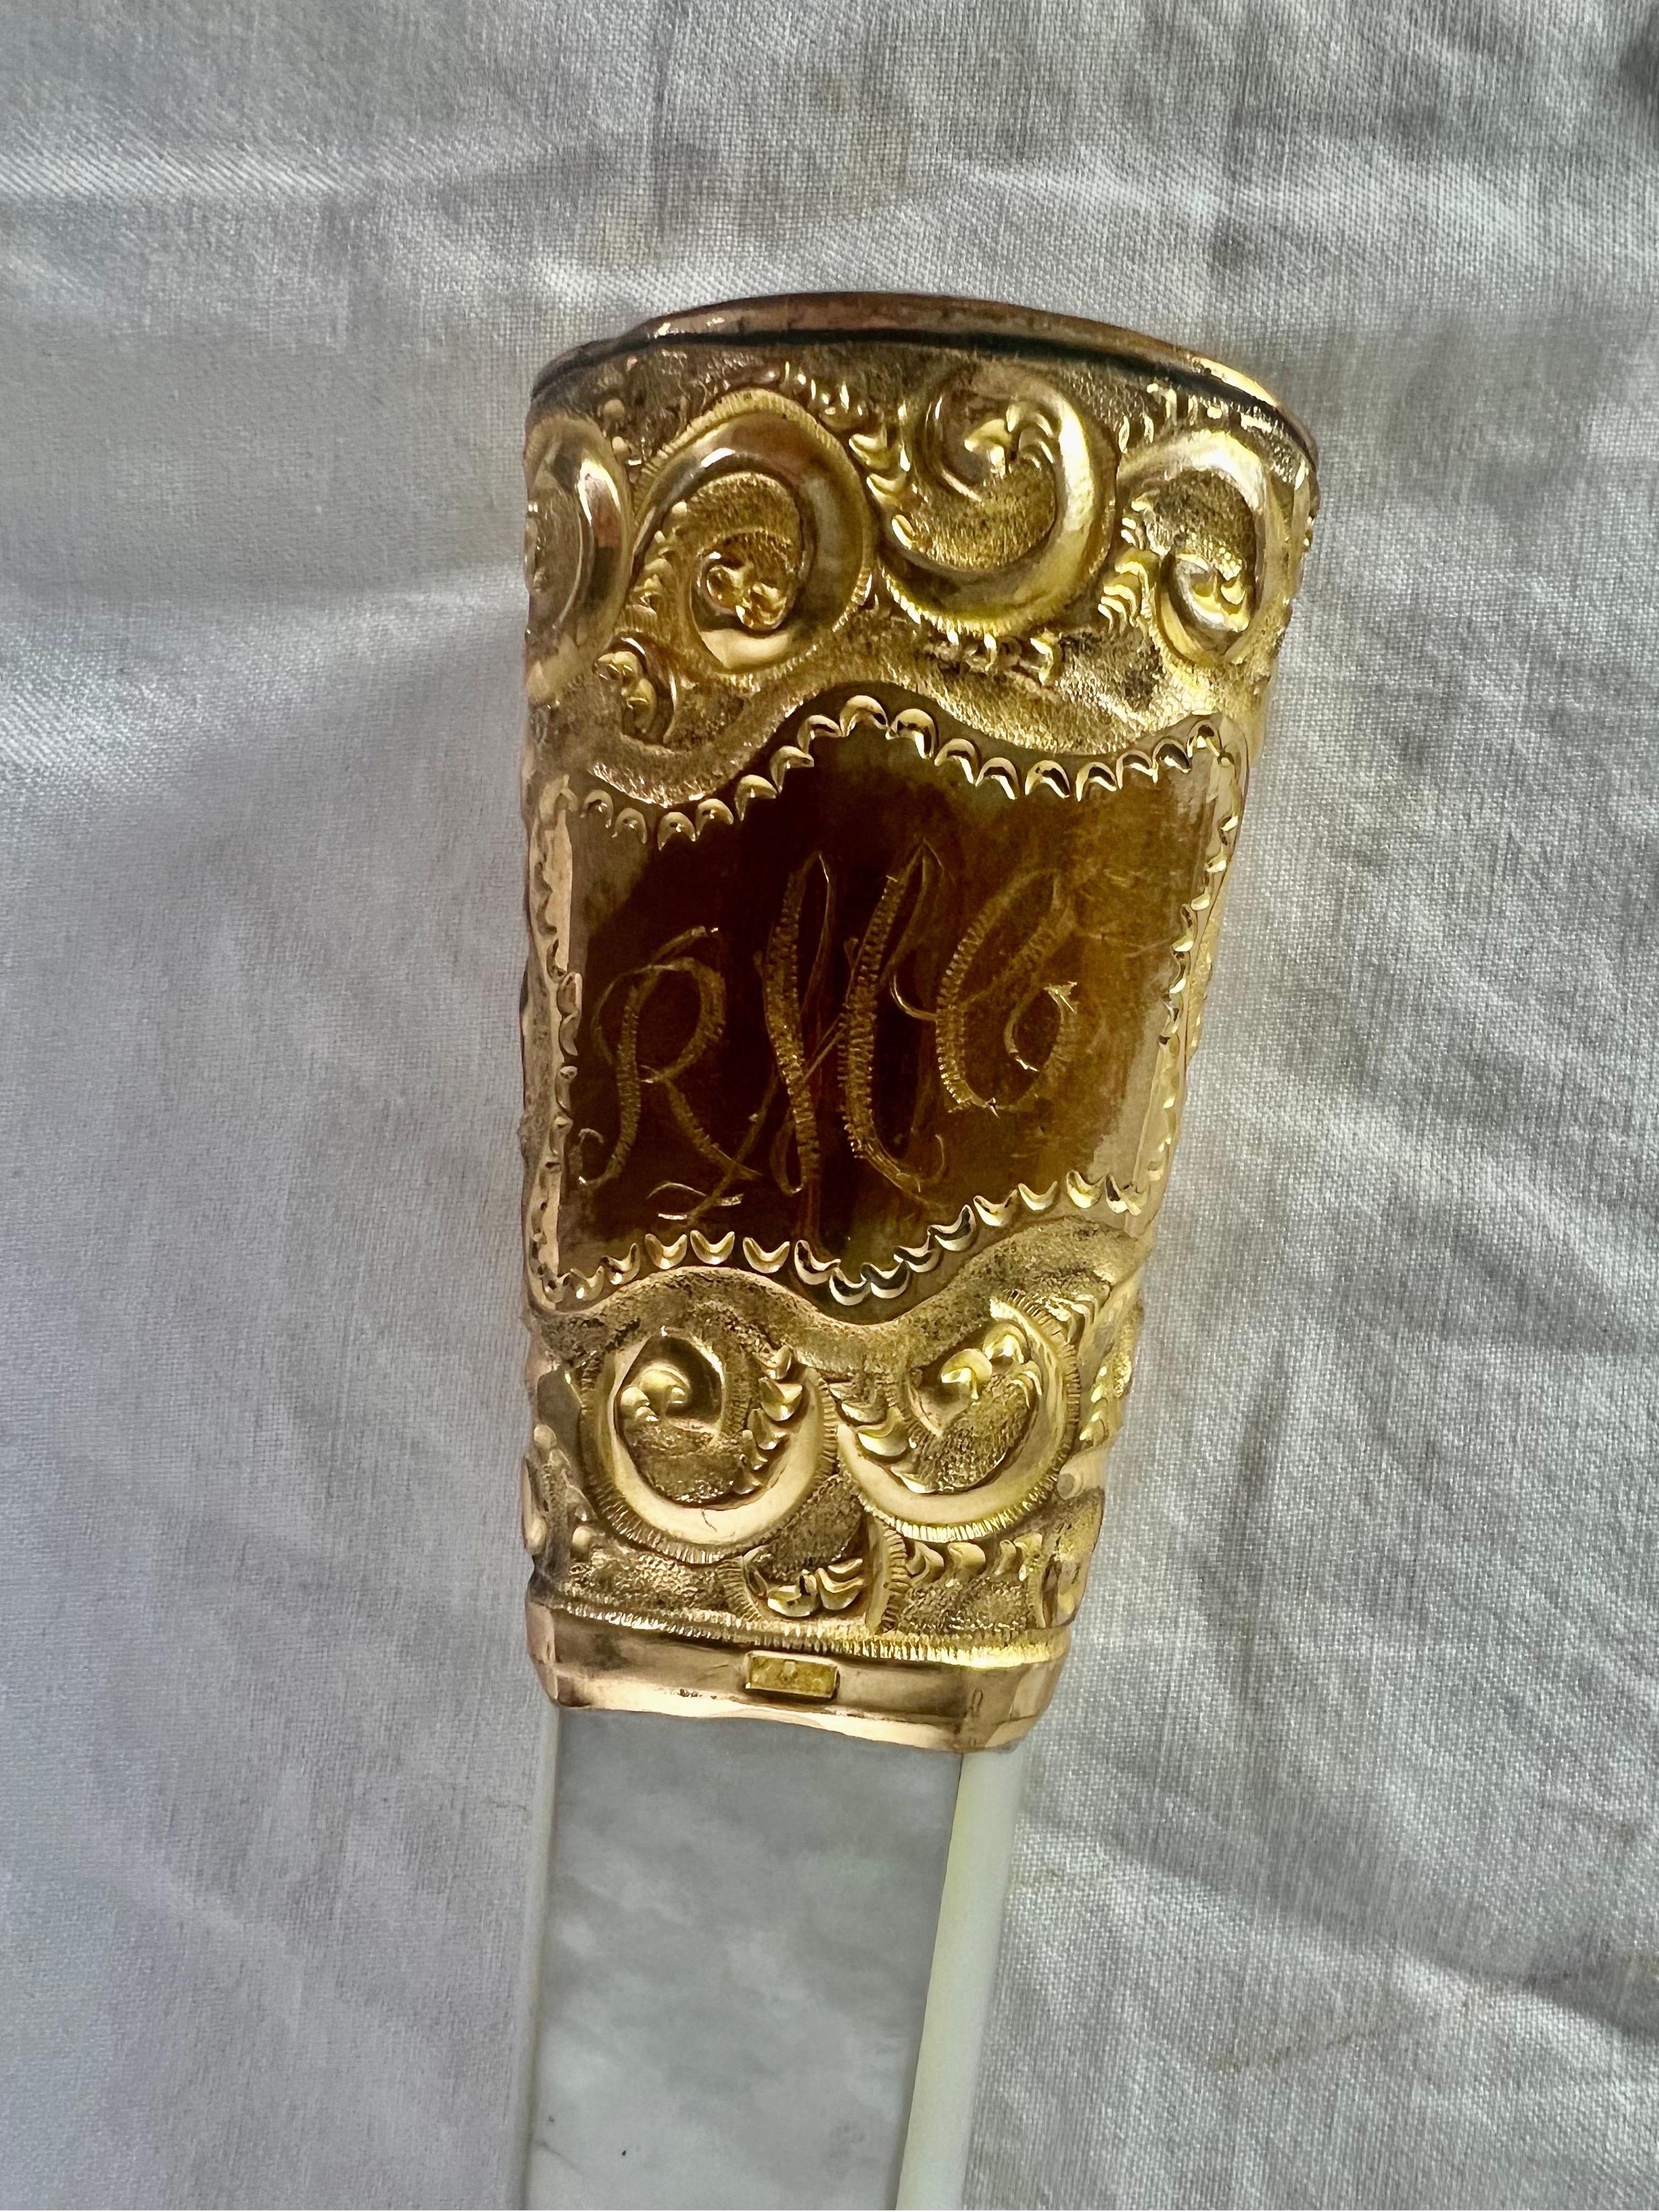 A custom magnifying glass made from a Victorian parasol handle by K&H adorned with intricate mother-of-pearl detailing and gold-washed silver repousse.  The handle is monogramed 